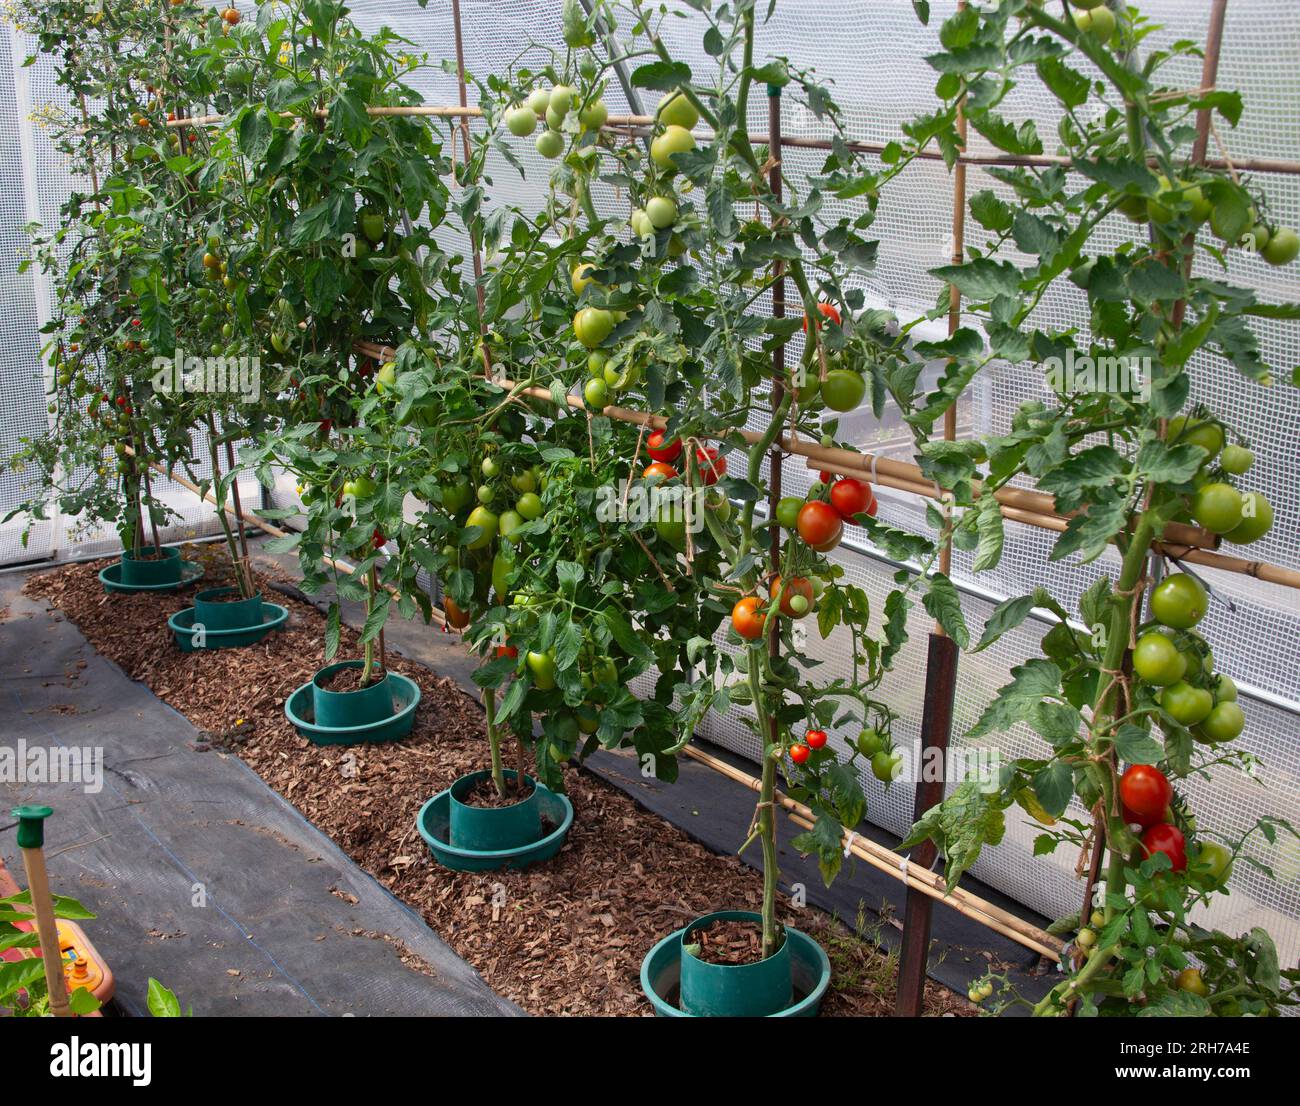 UK Tomato growing in Polytunnel with Leaf Curl on some plants Stock Photo